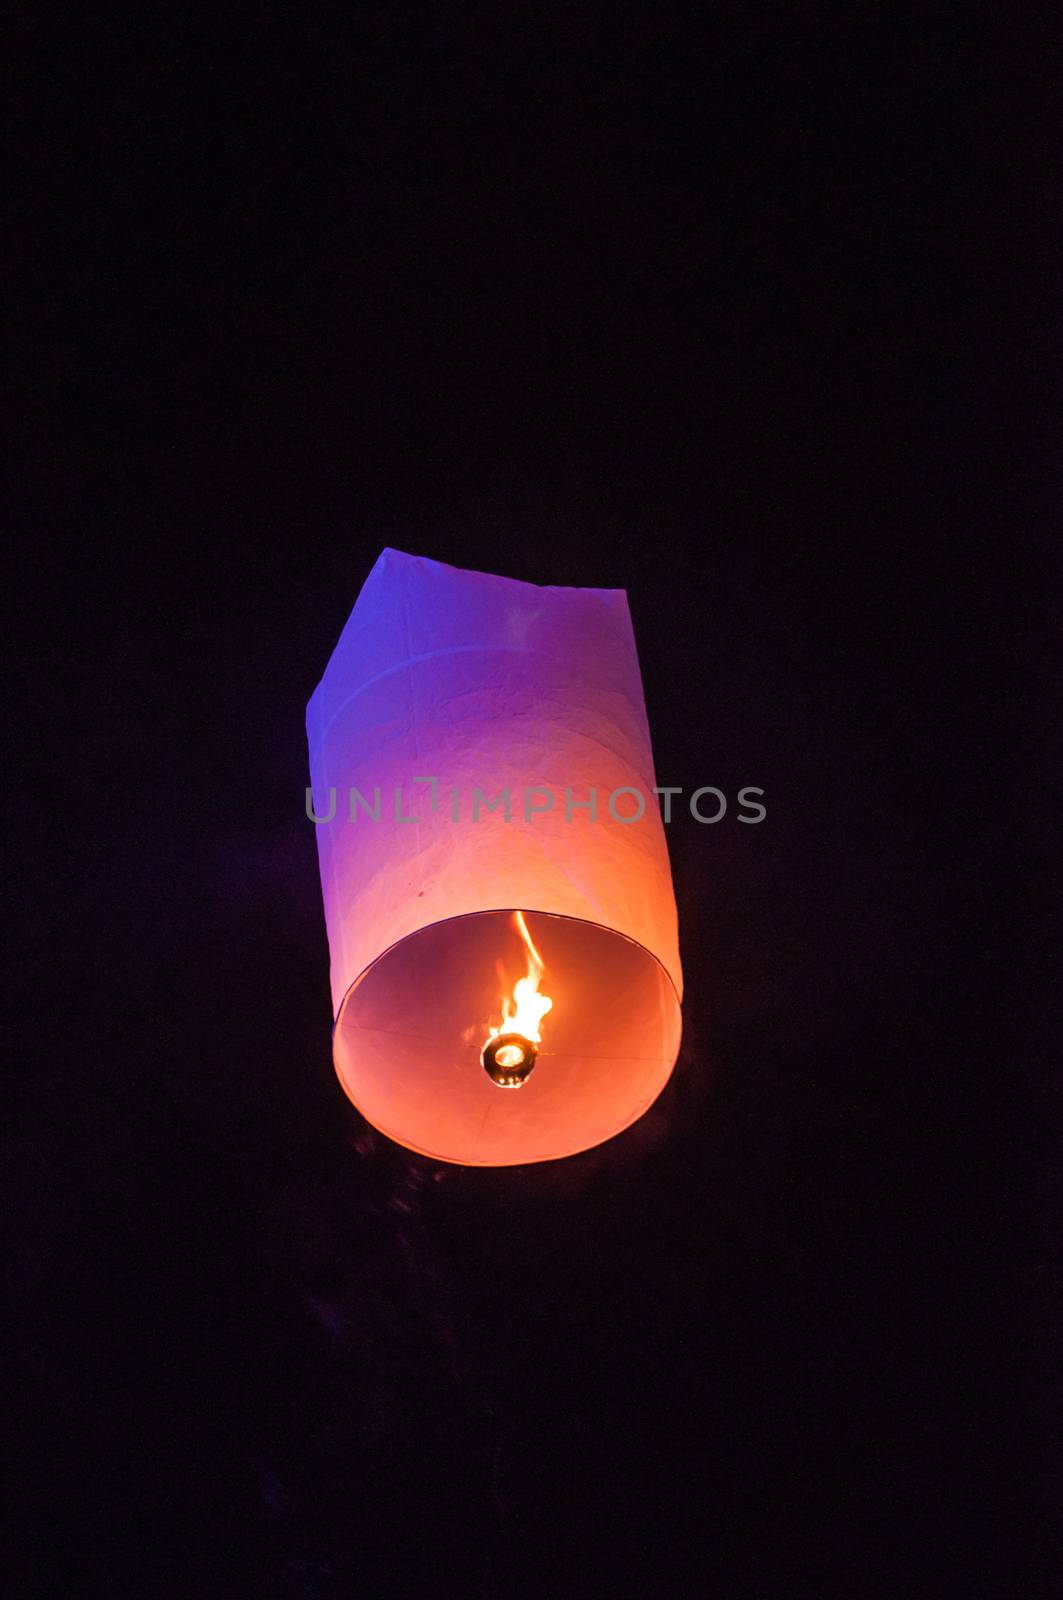 Single Floating Lantern during Loy Kratong Festival in Thailand